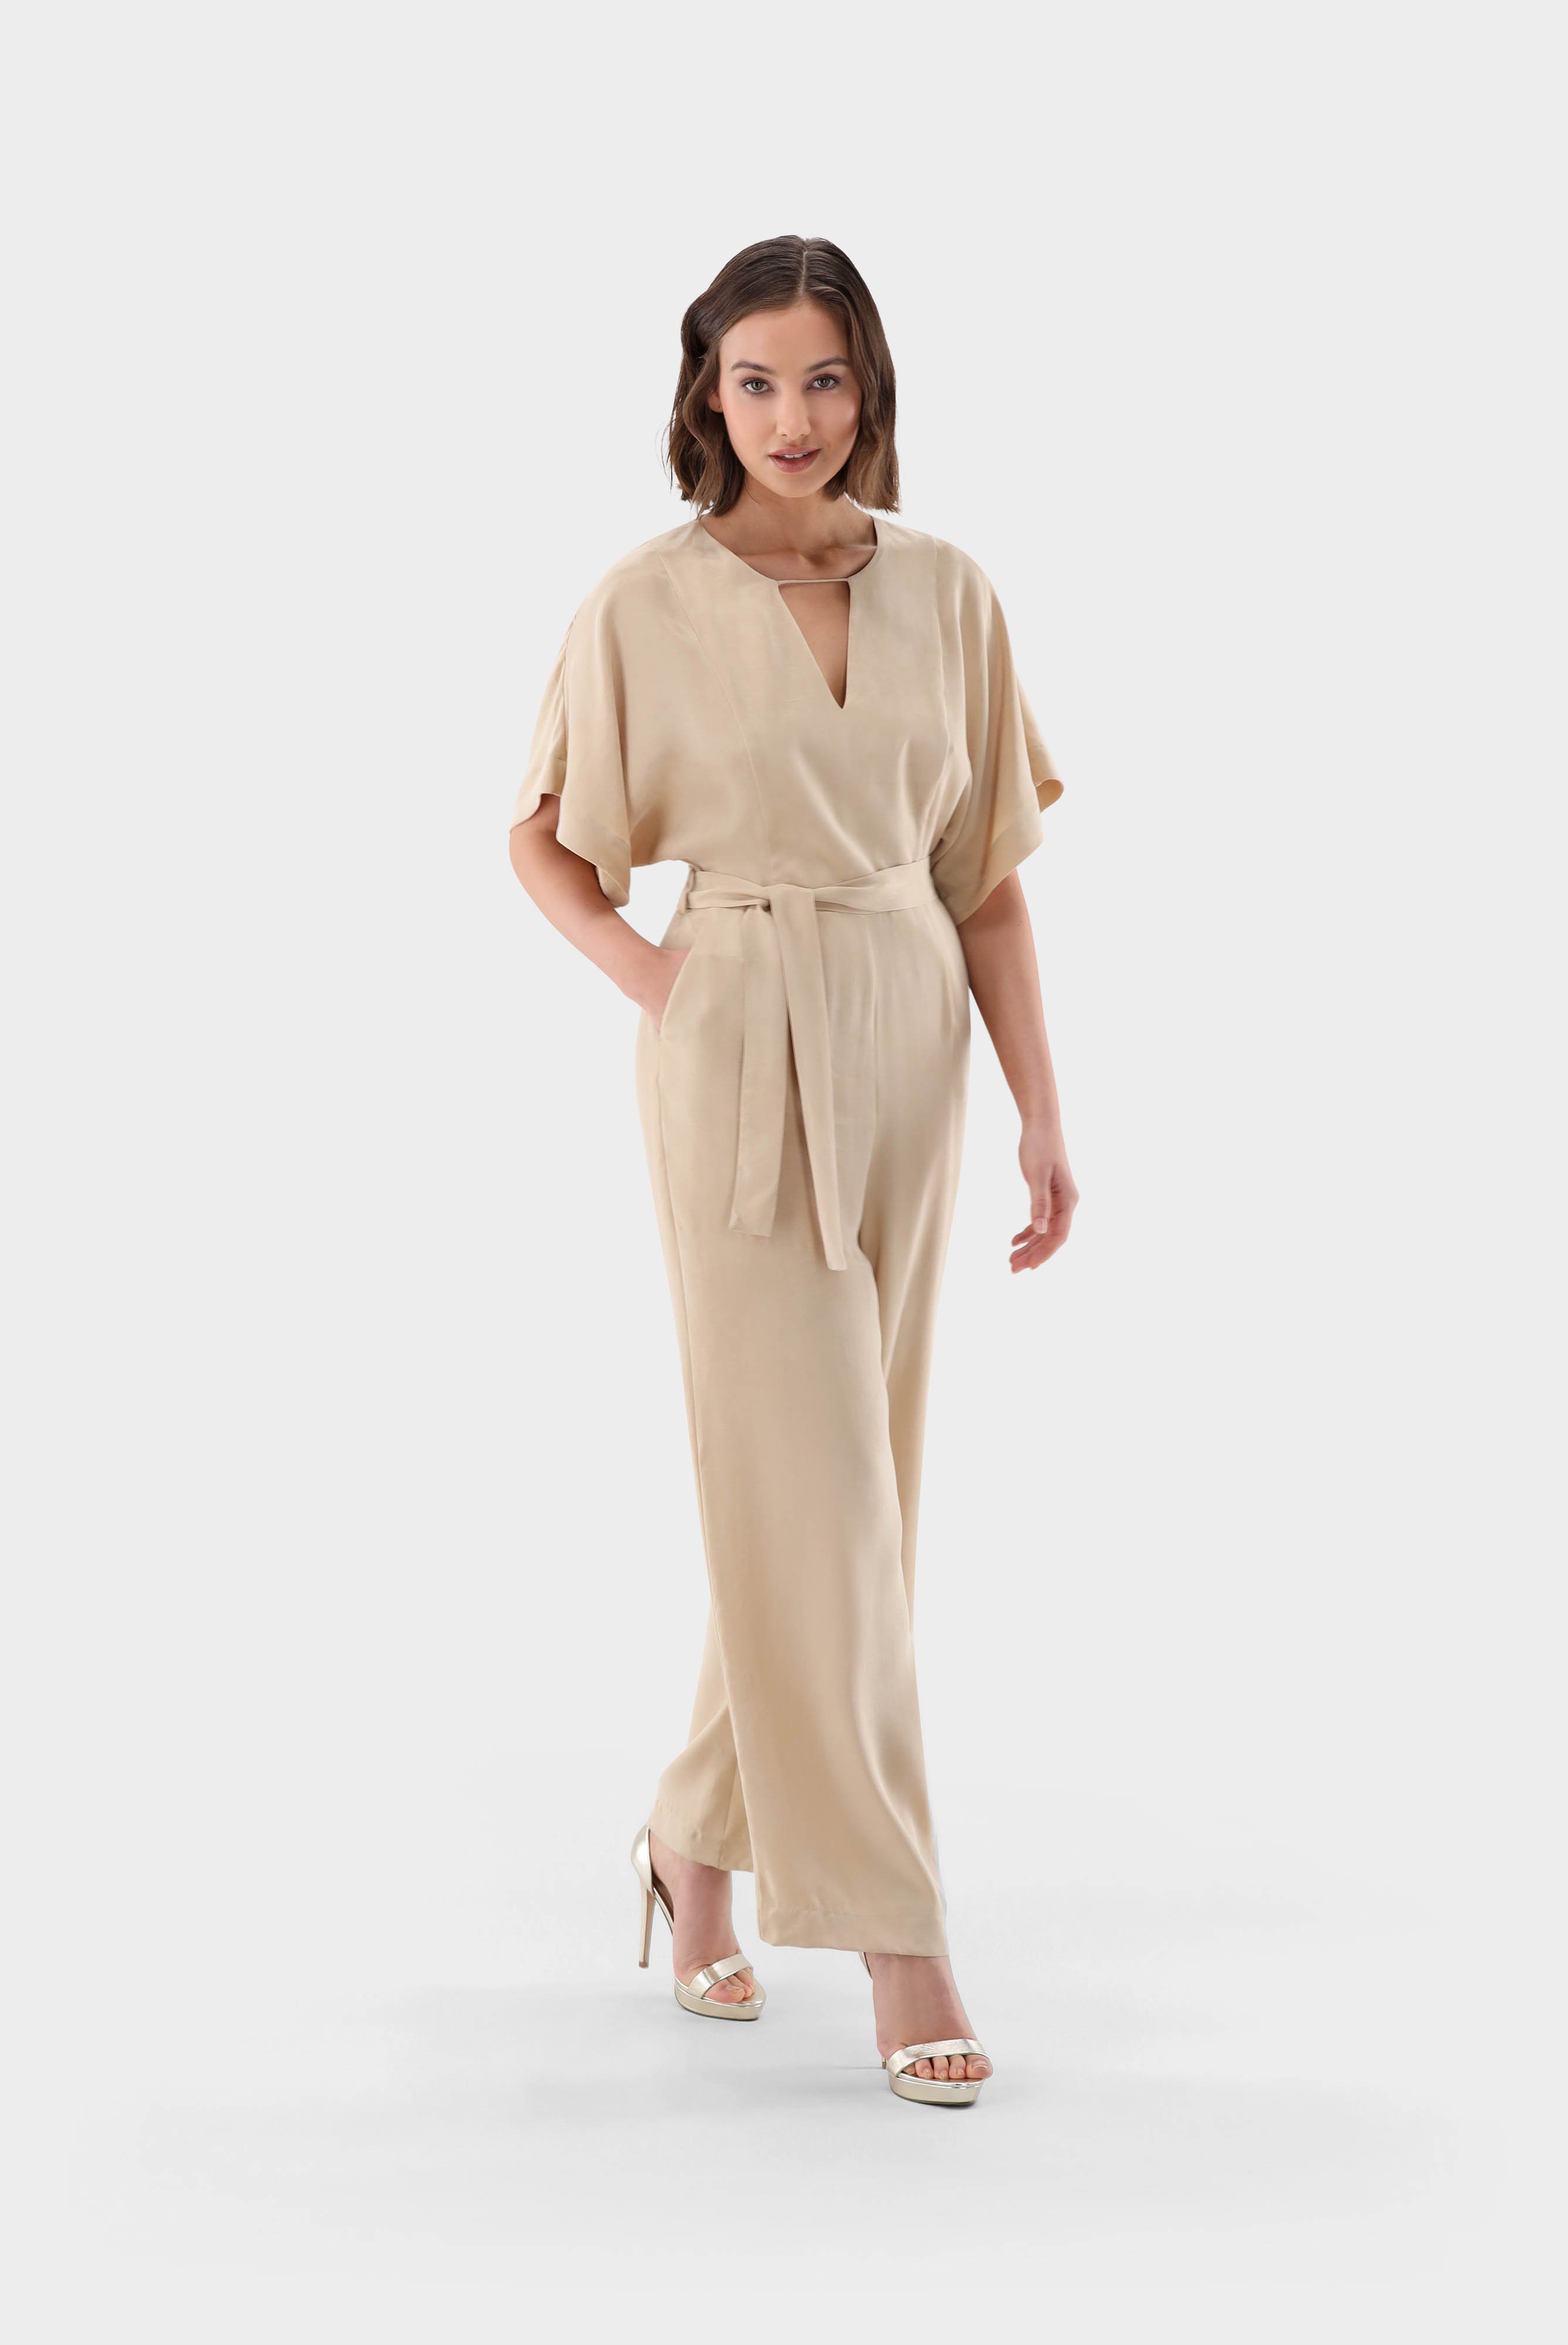 Jeans & Trousers+Jumpsuit with wide Sleeves+05.658Q.22.155007.250.36